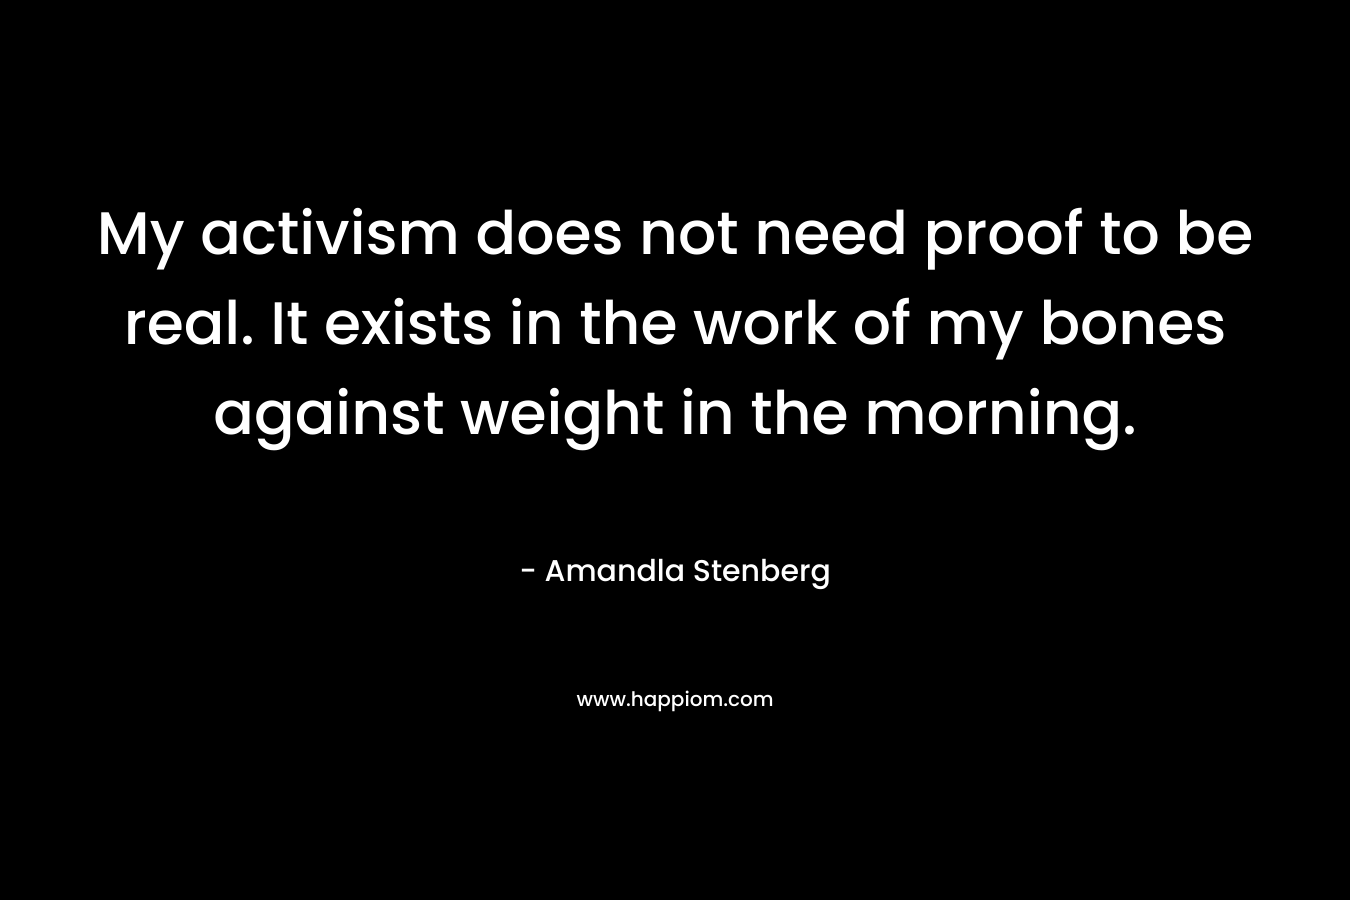 My activism does not need proof to be real. It exists in the work of my bones against weight in the morning.